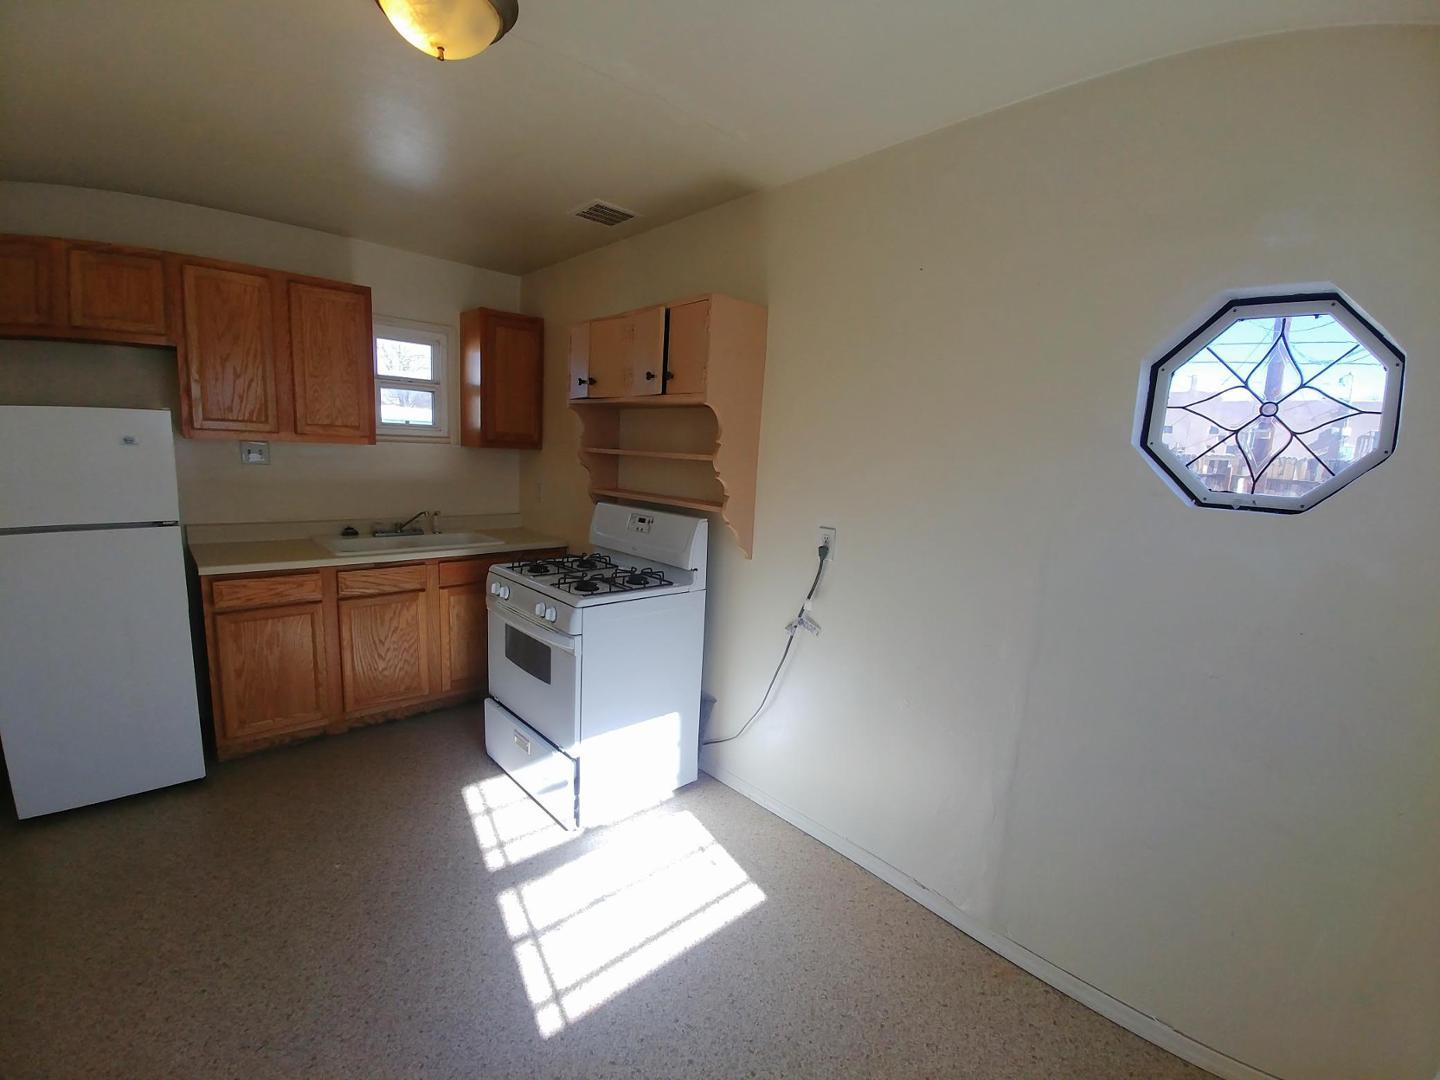 216 Princeton Drive SE Apt D, Albuquerque, New Mexico 87106, ,1 BathroomBathrooms,Residential Lease,For Rent,216 Princeton Drive SE Apt D,1061189